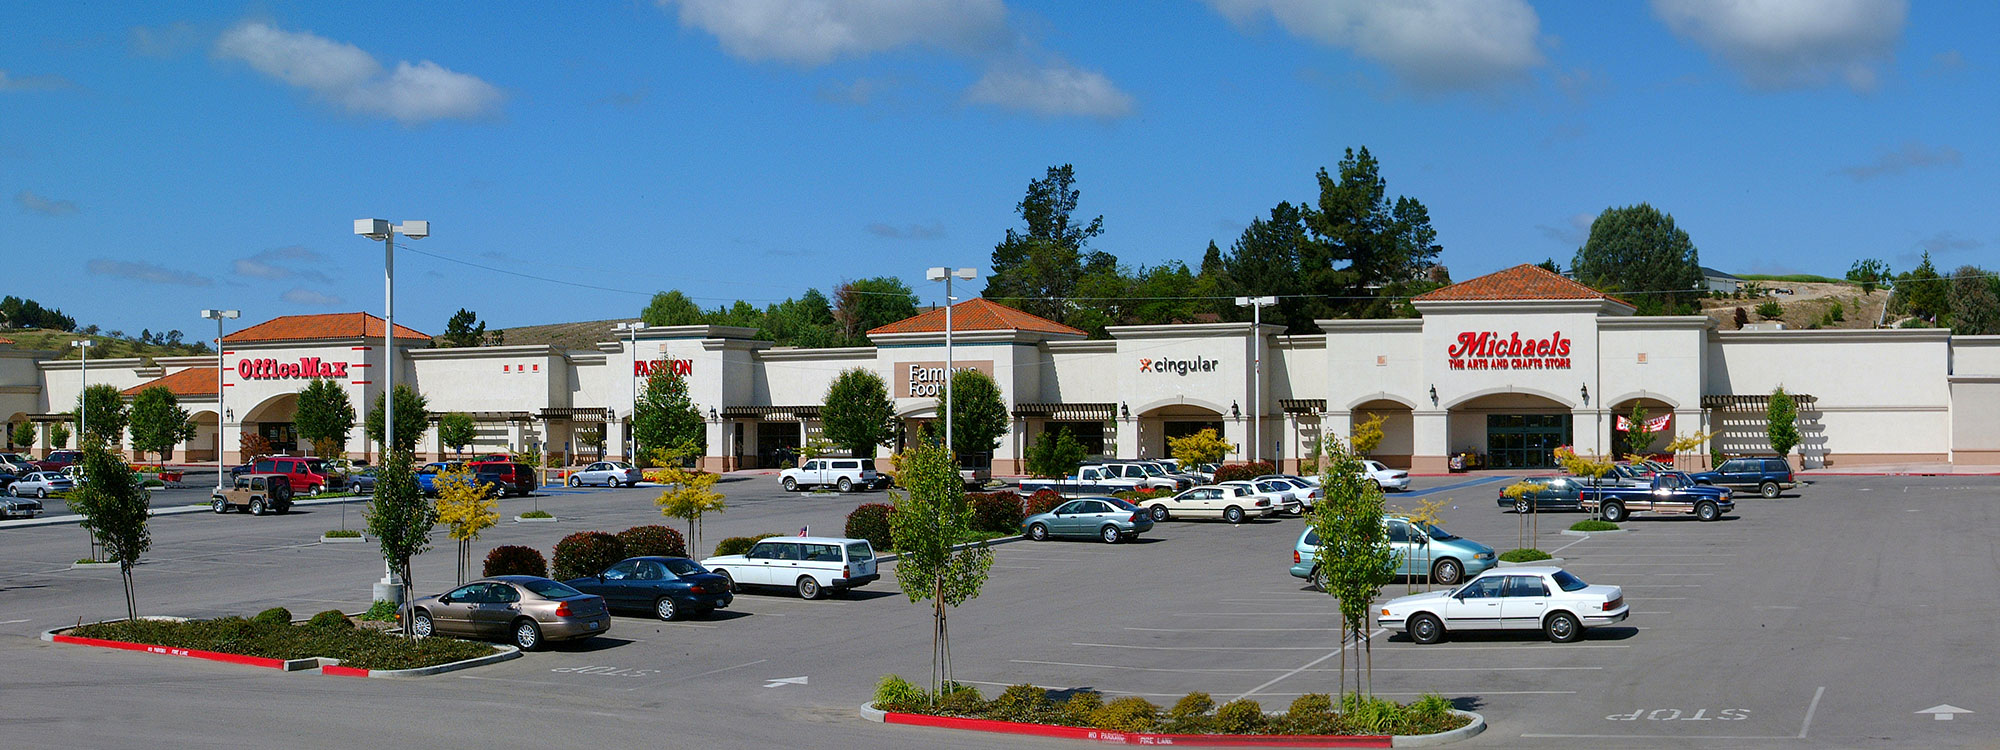 Paso Robles Contractor - Builder of Retail Center - Target Center Contractor - JW Design & Construction